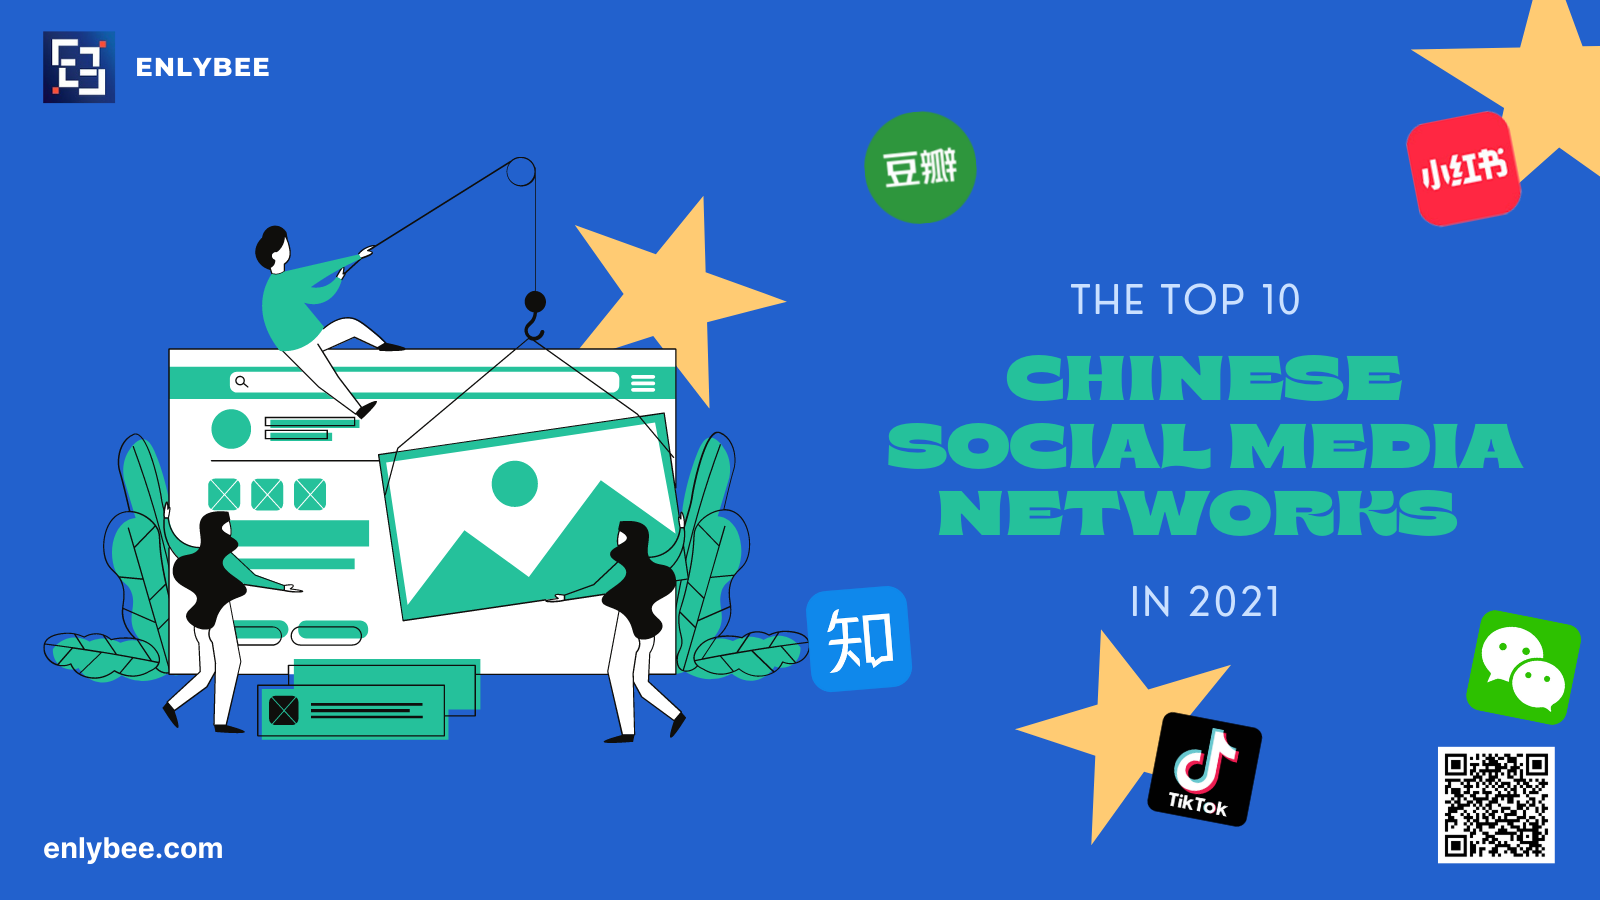 The Top 10 Chinese Social Media Networks in 2021